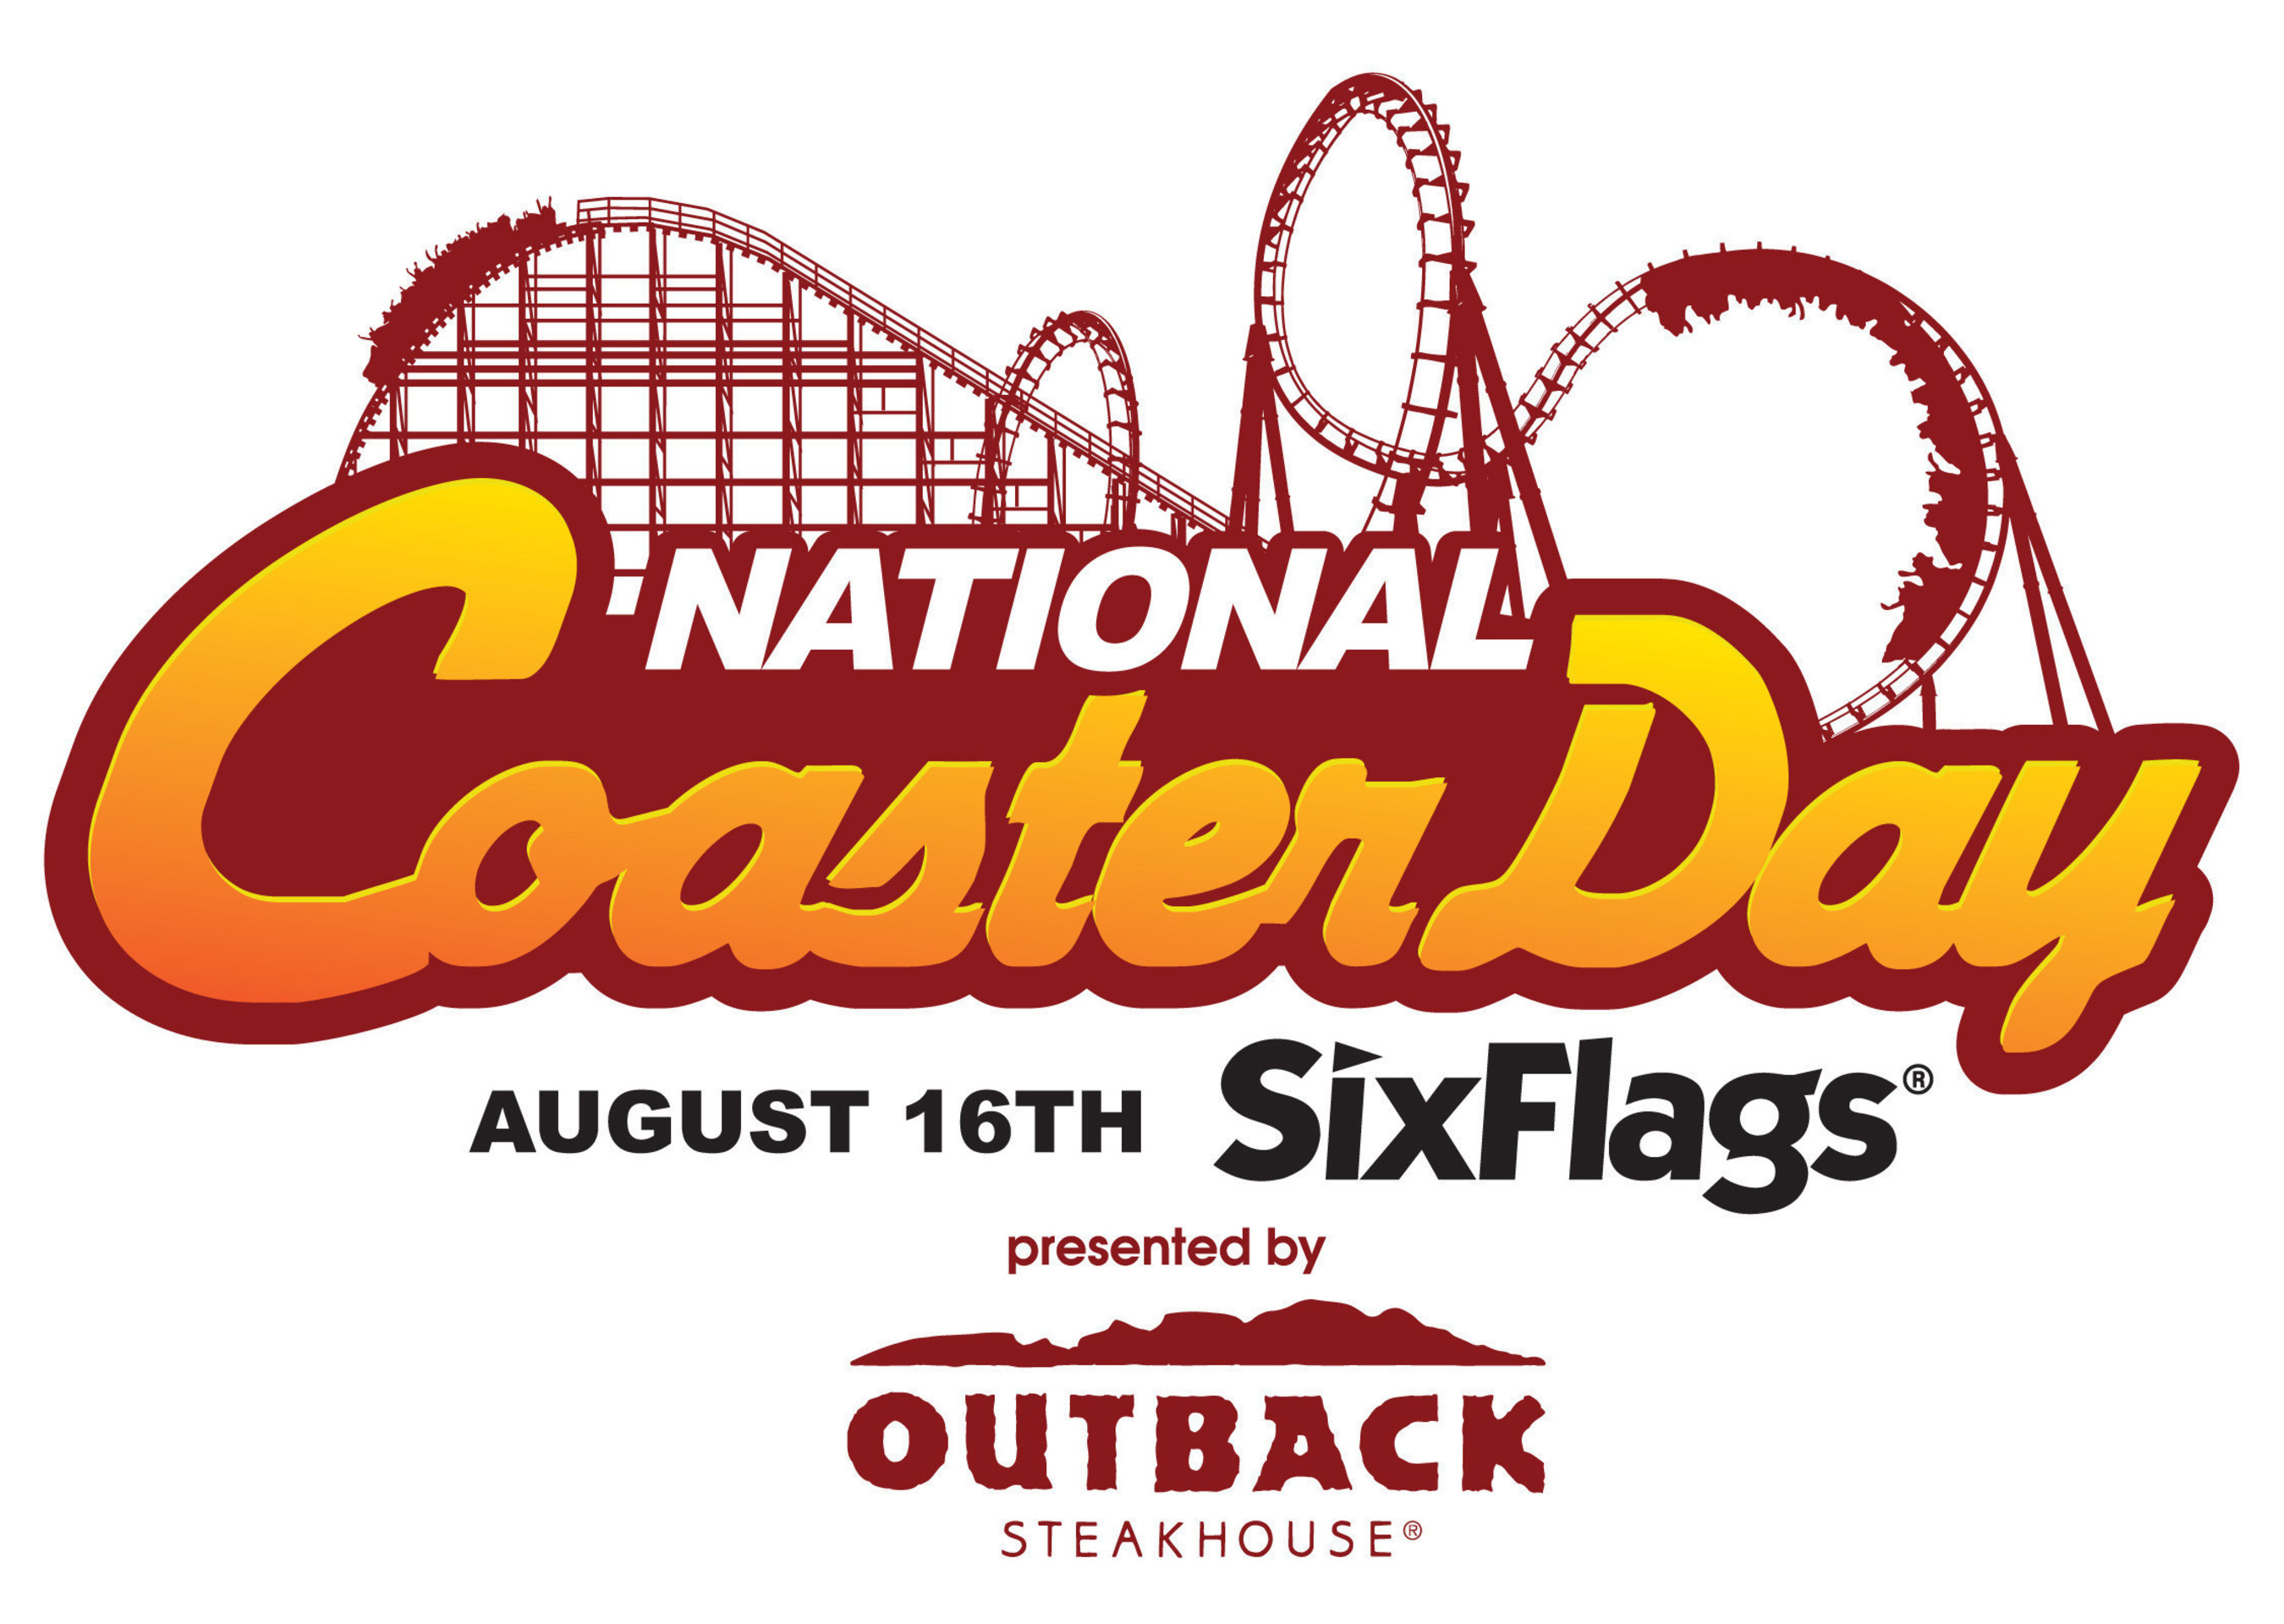 Six Flags Theme Parks celebrate National Coaster Day